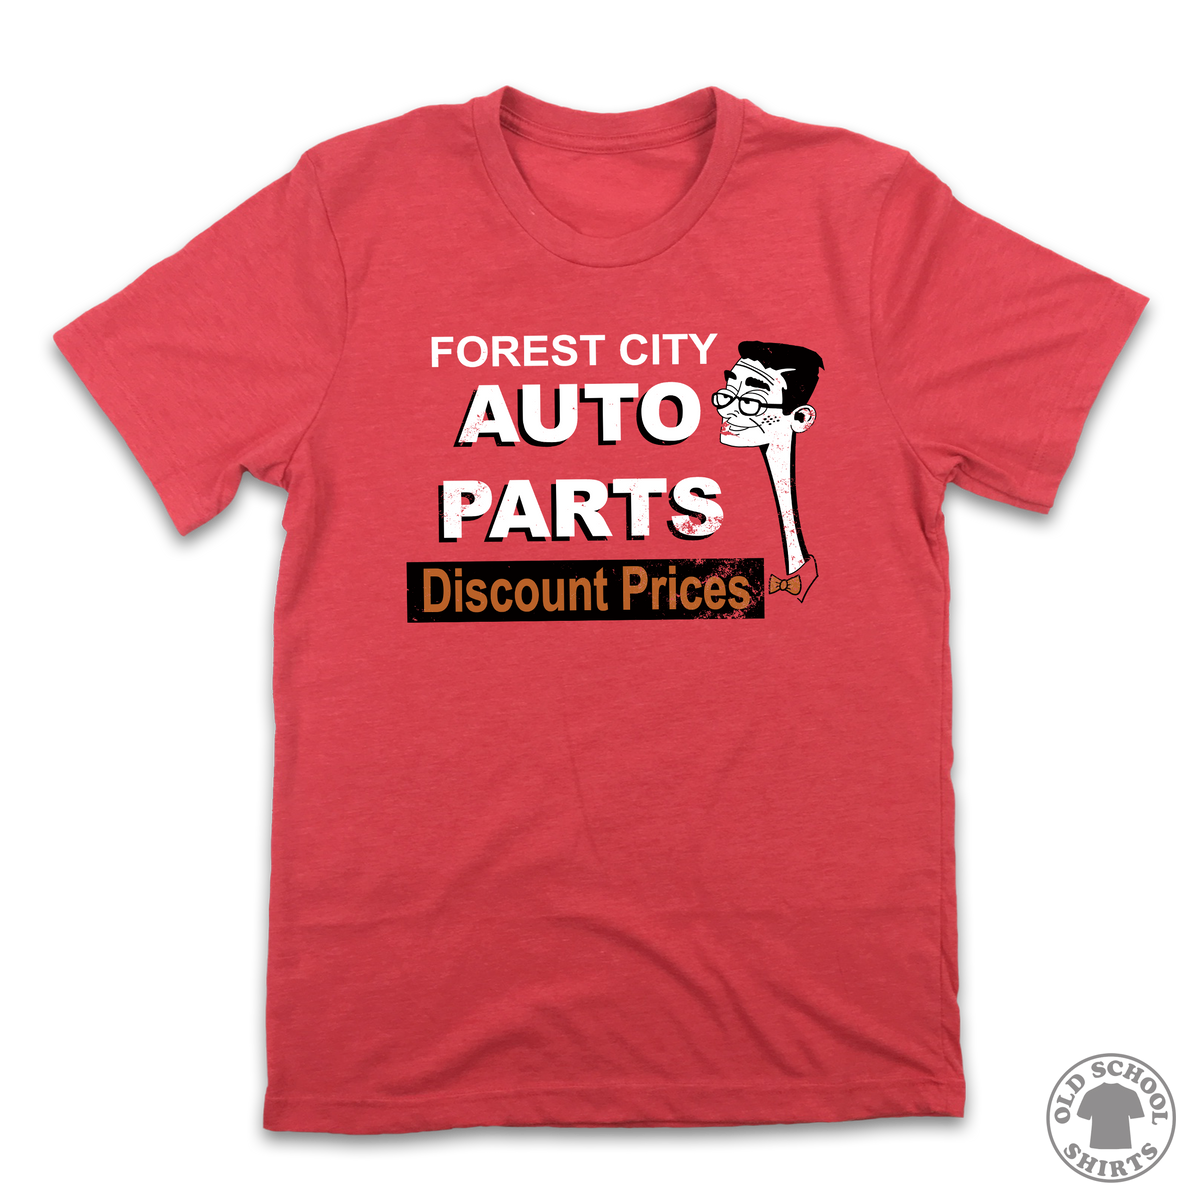 Forest City Auto Parts - Old School Shirts- Retro Sports T Shirts